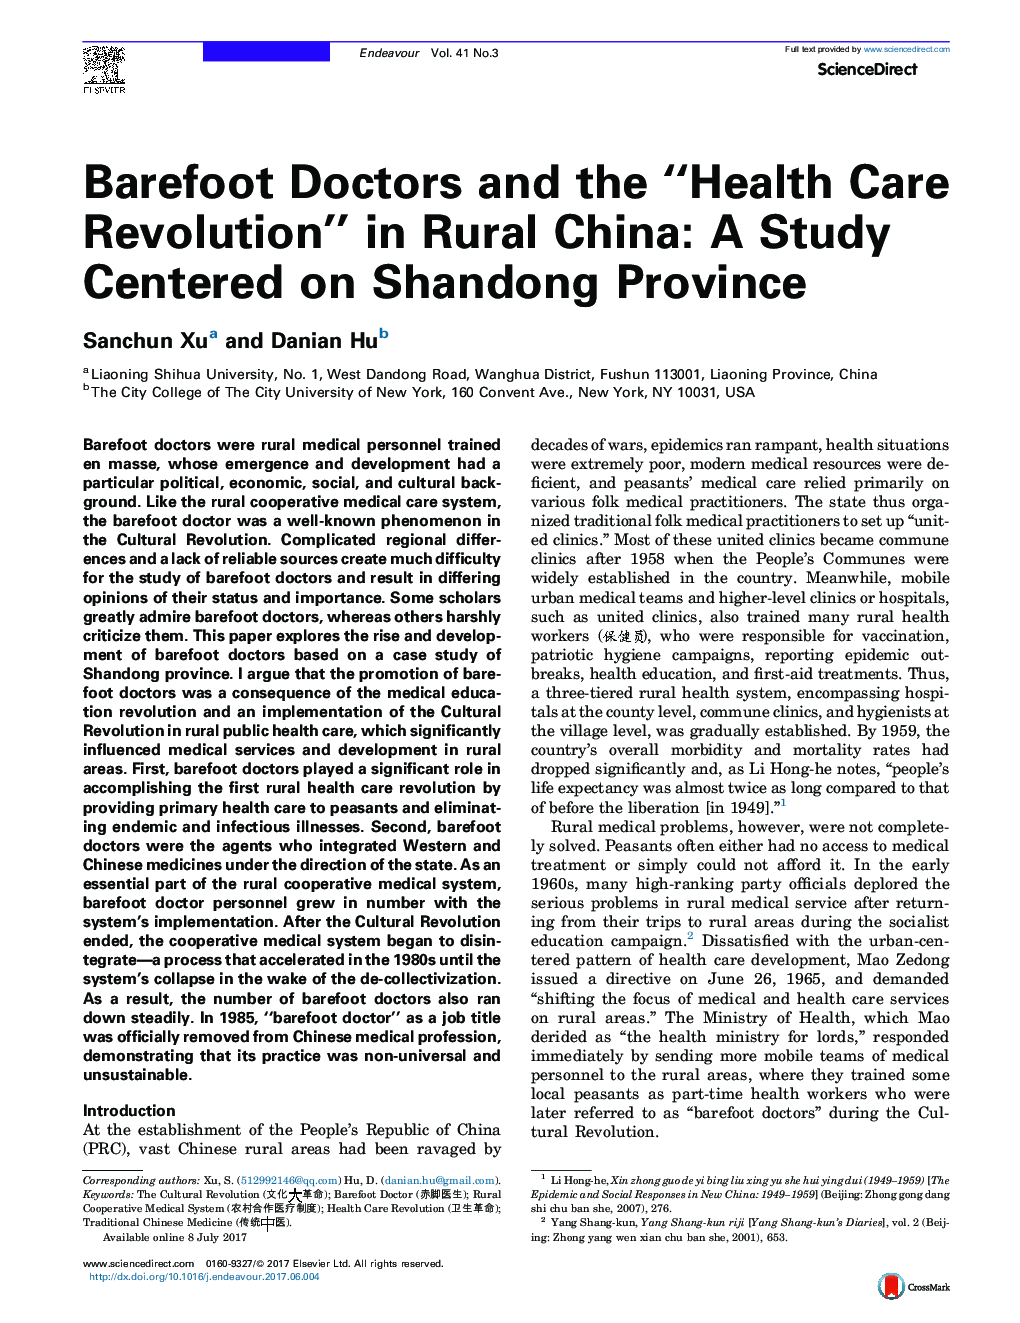 Barefoot Doctors and the “Health Care Revolution” in Rural China: A Study Centered on Shandong Province